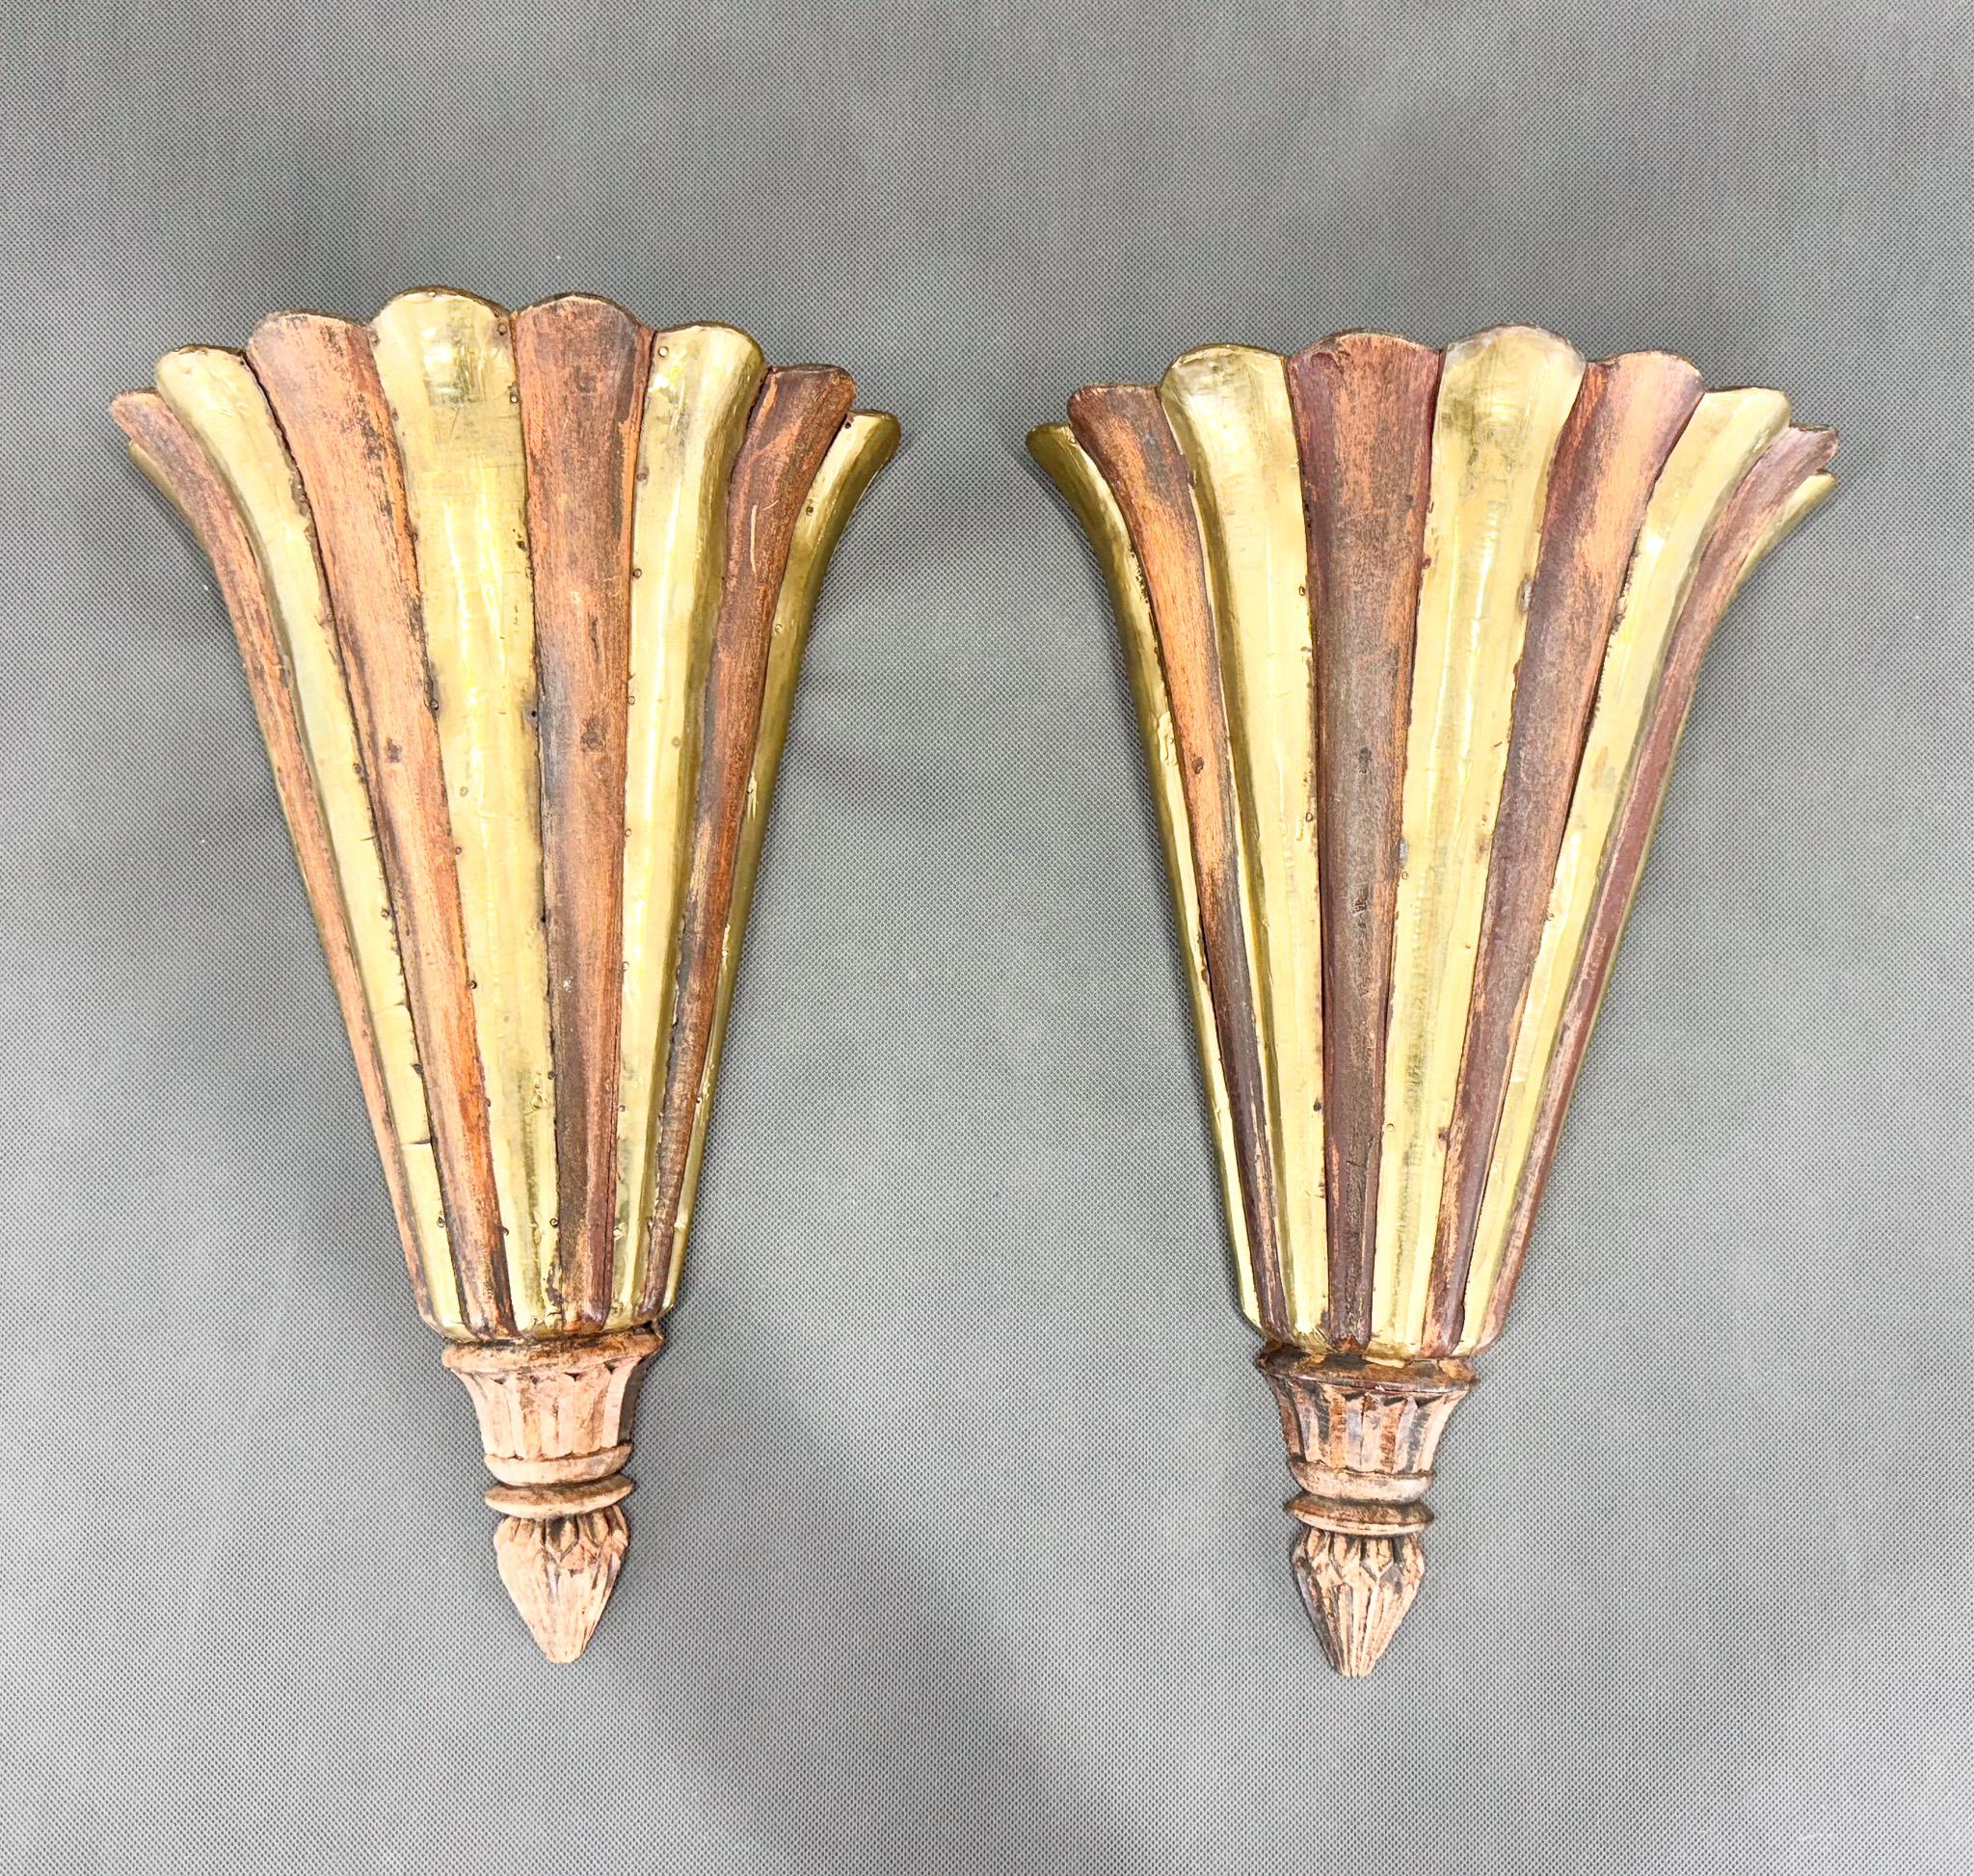 Antique French wooden Art Deco wall mount carved shelves converted into wall lights. Very tasteful combination of old wood and brass. Luxurious antique look. 
Bulbs: 2 x 1 E26-E27. US wiring compatible.